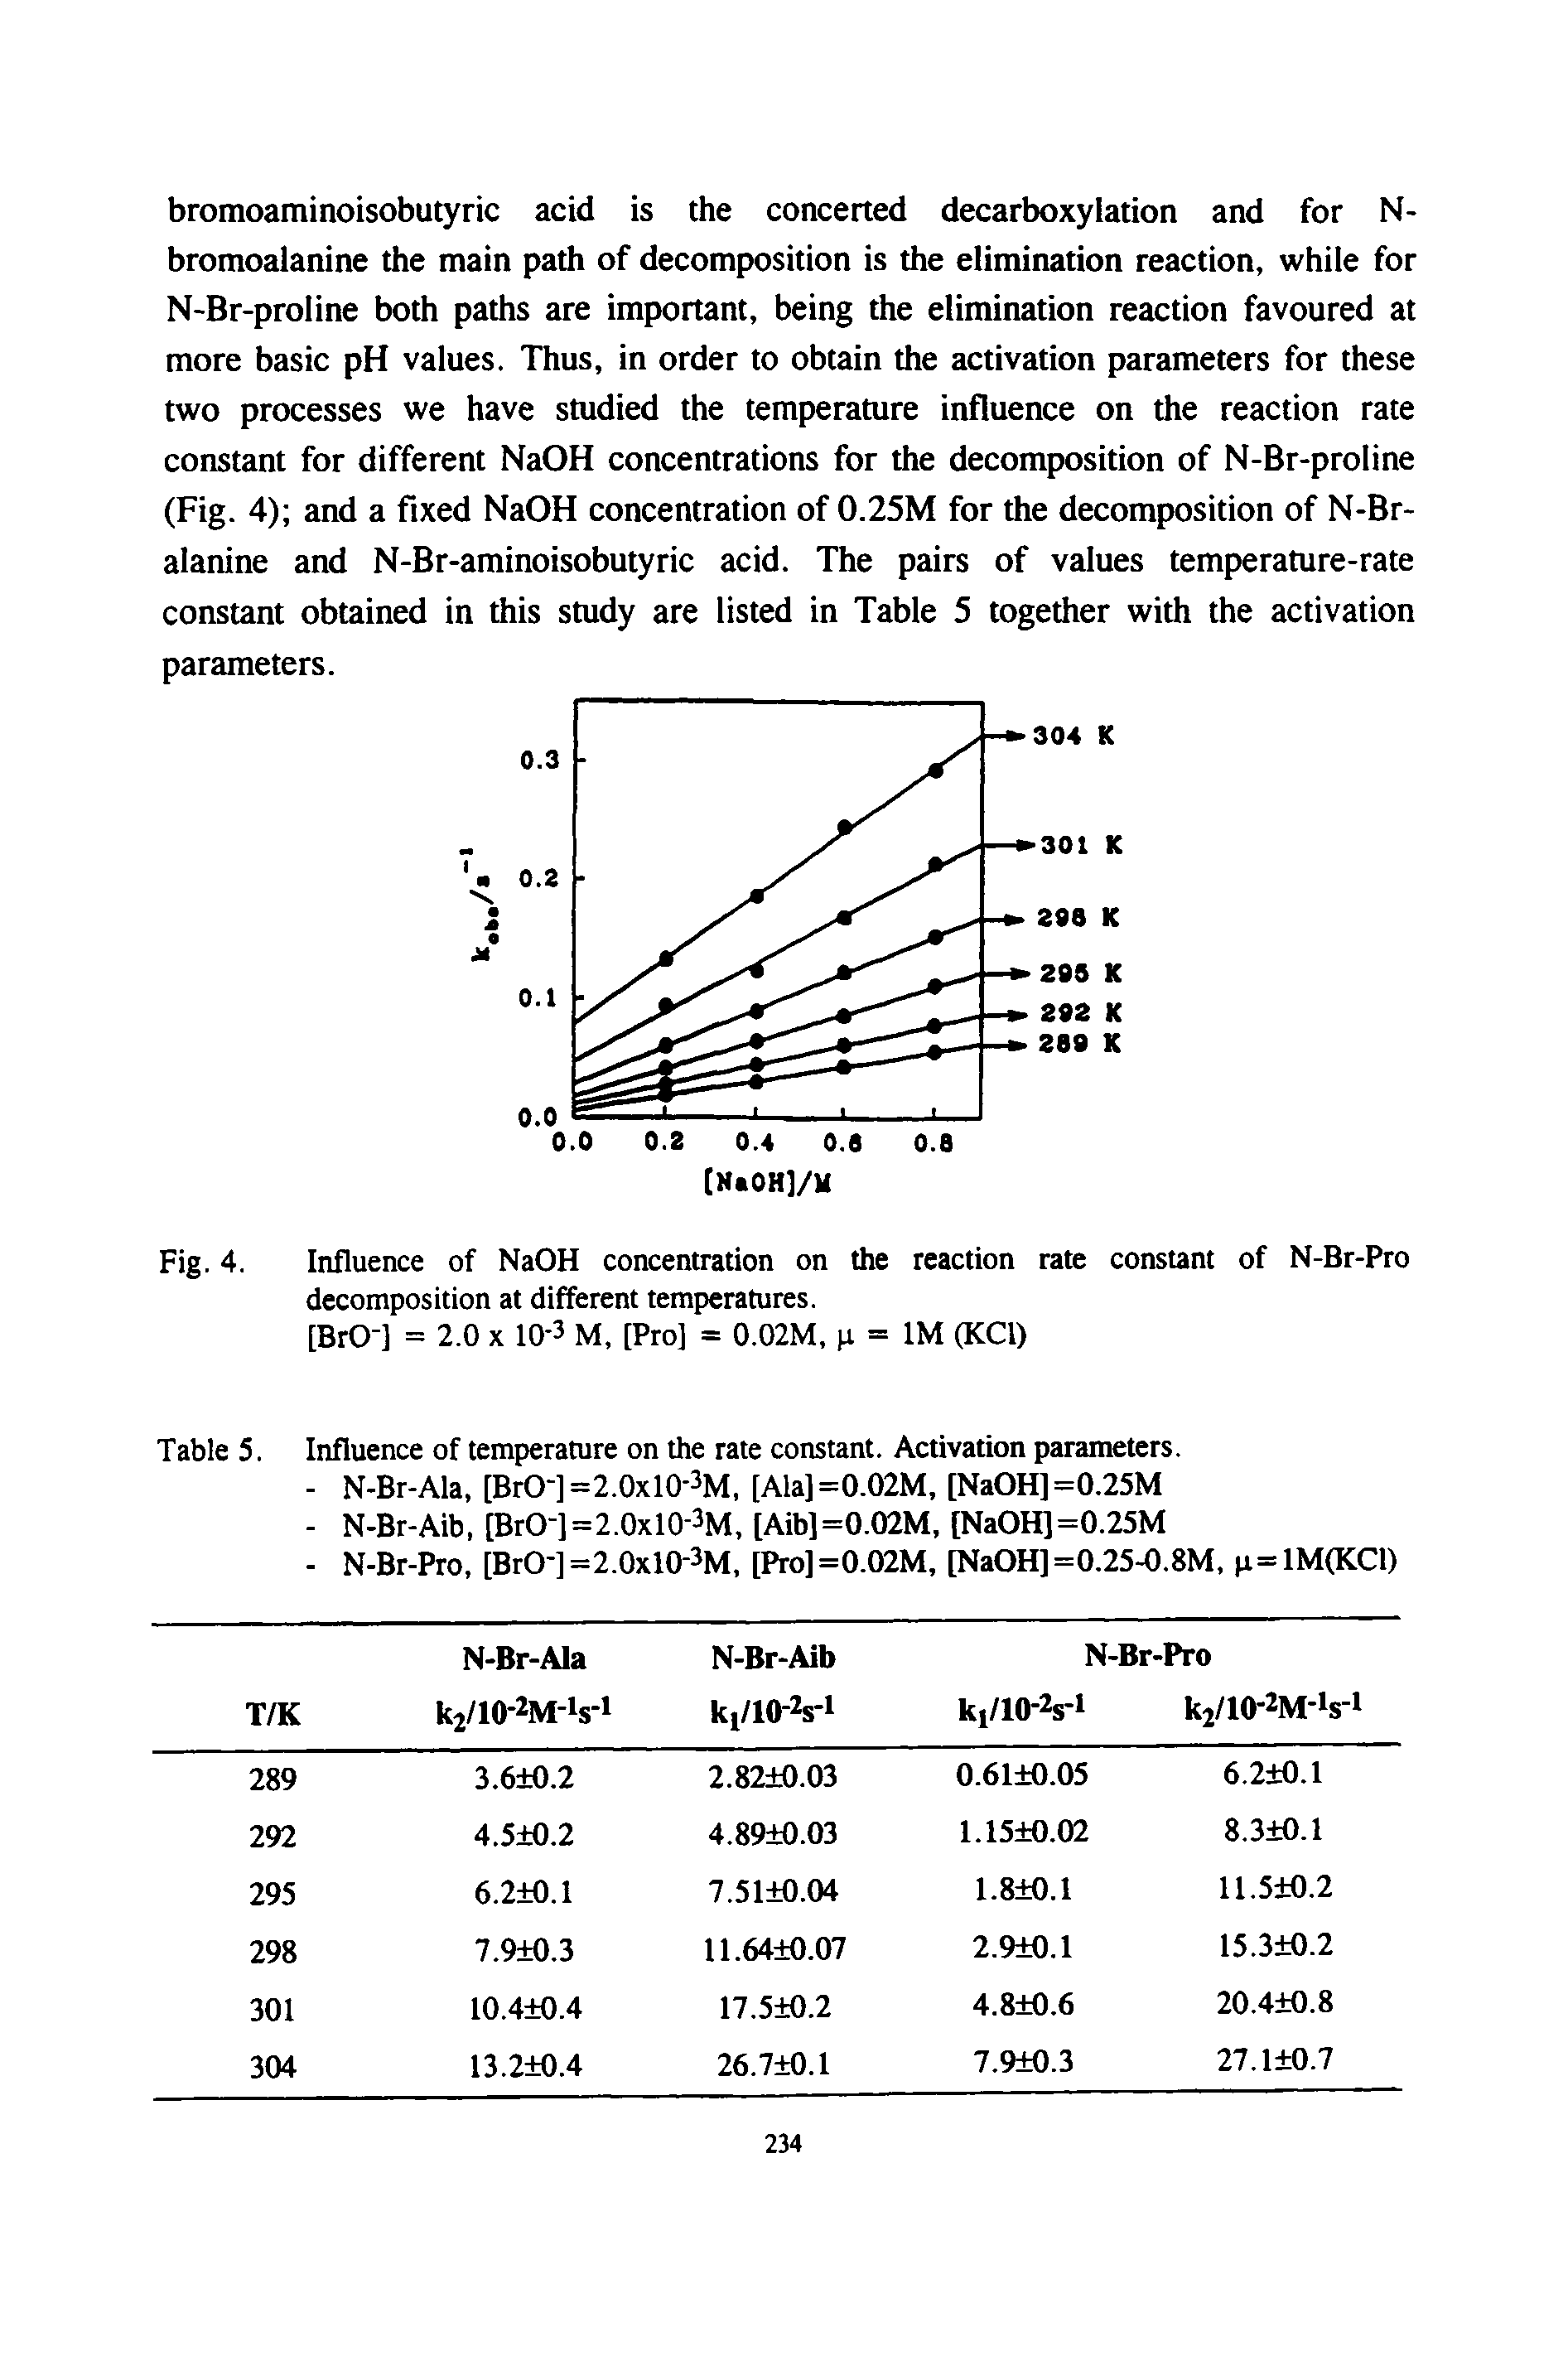 Fig. 4. Influence of NaOH concentration on the reaction rate constant of N-Br-Pro decomposition at different temperatures.